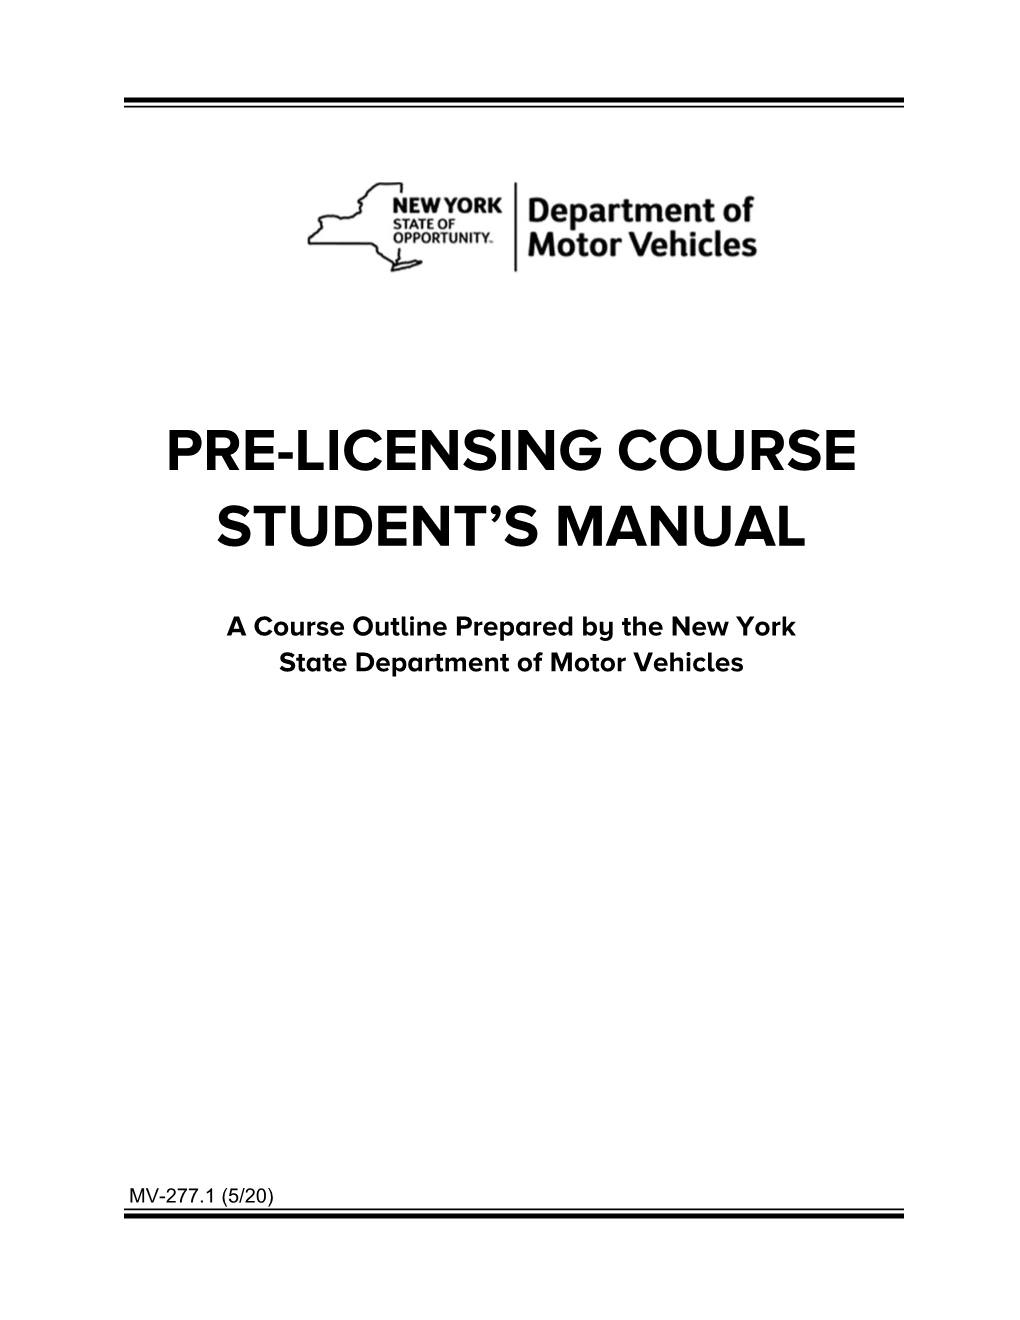 Pre-Licensing Course Student's Manual